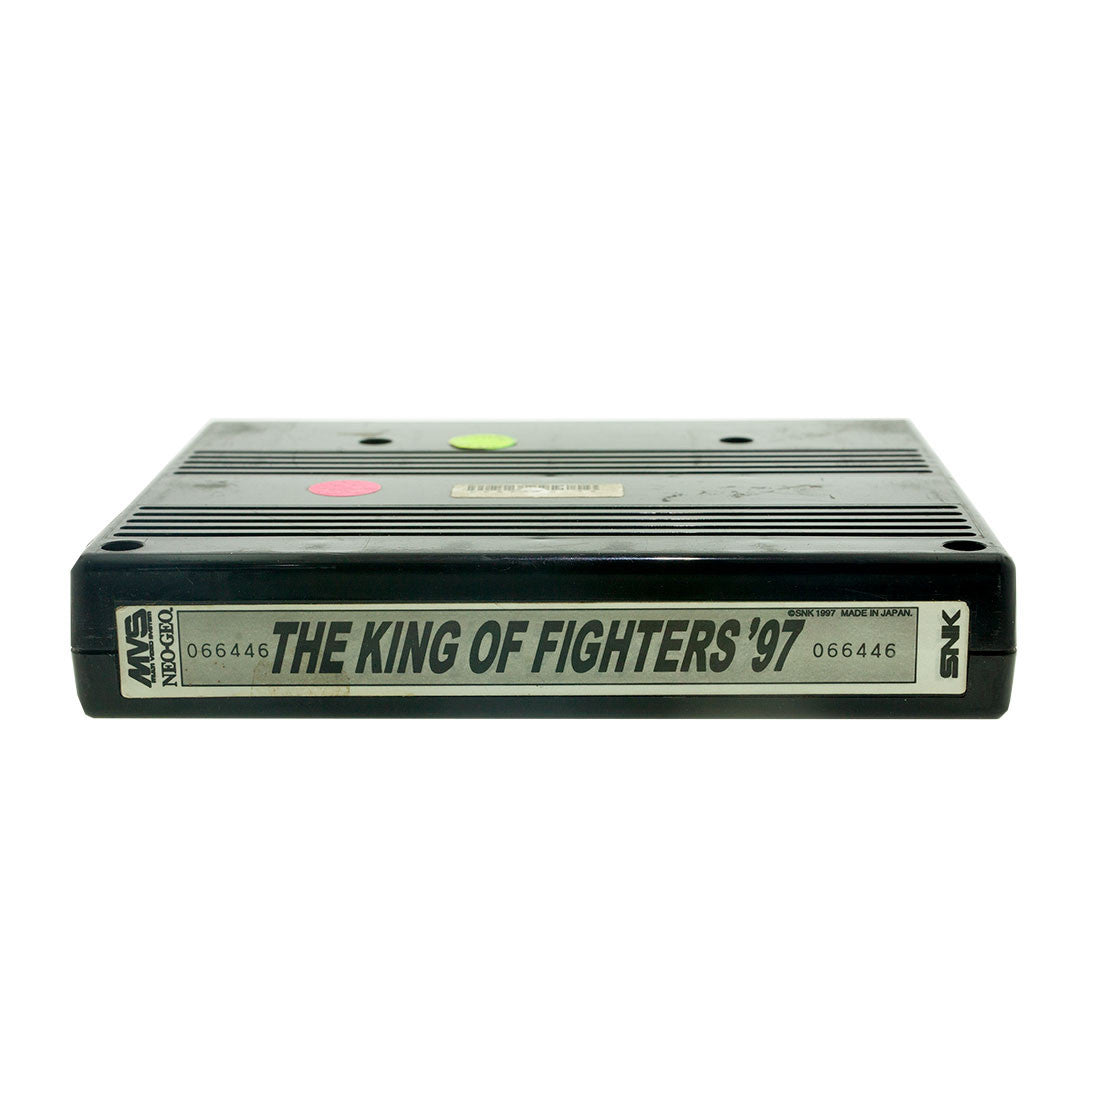 SNK The King of Fighters 97 T4964808101191 for sale online